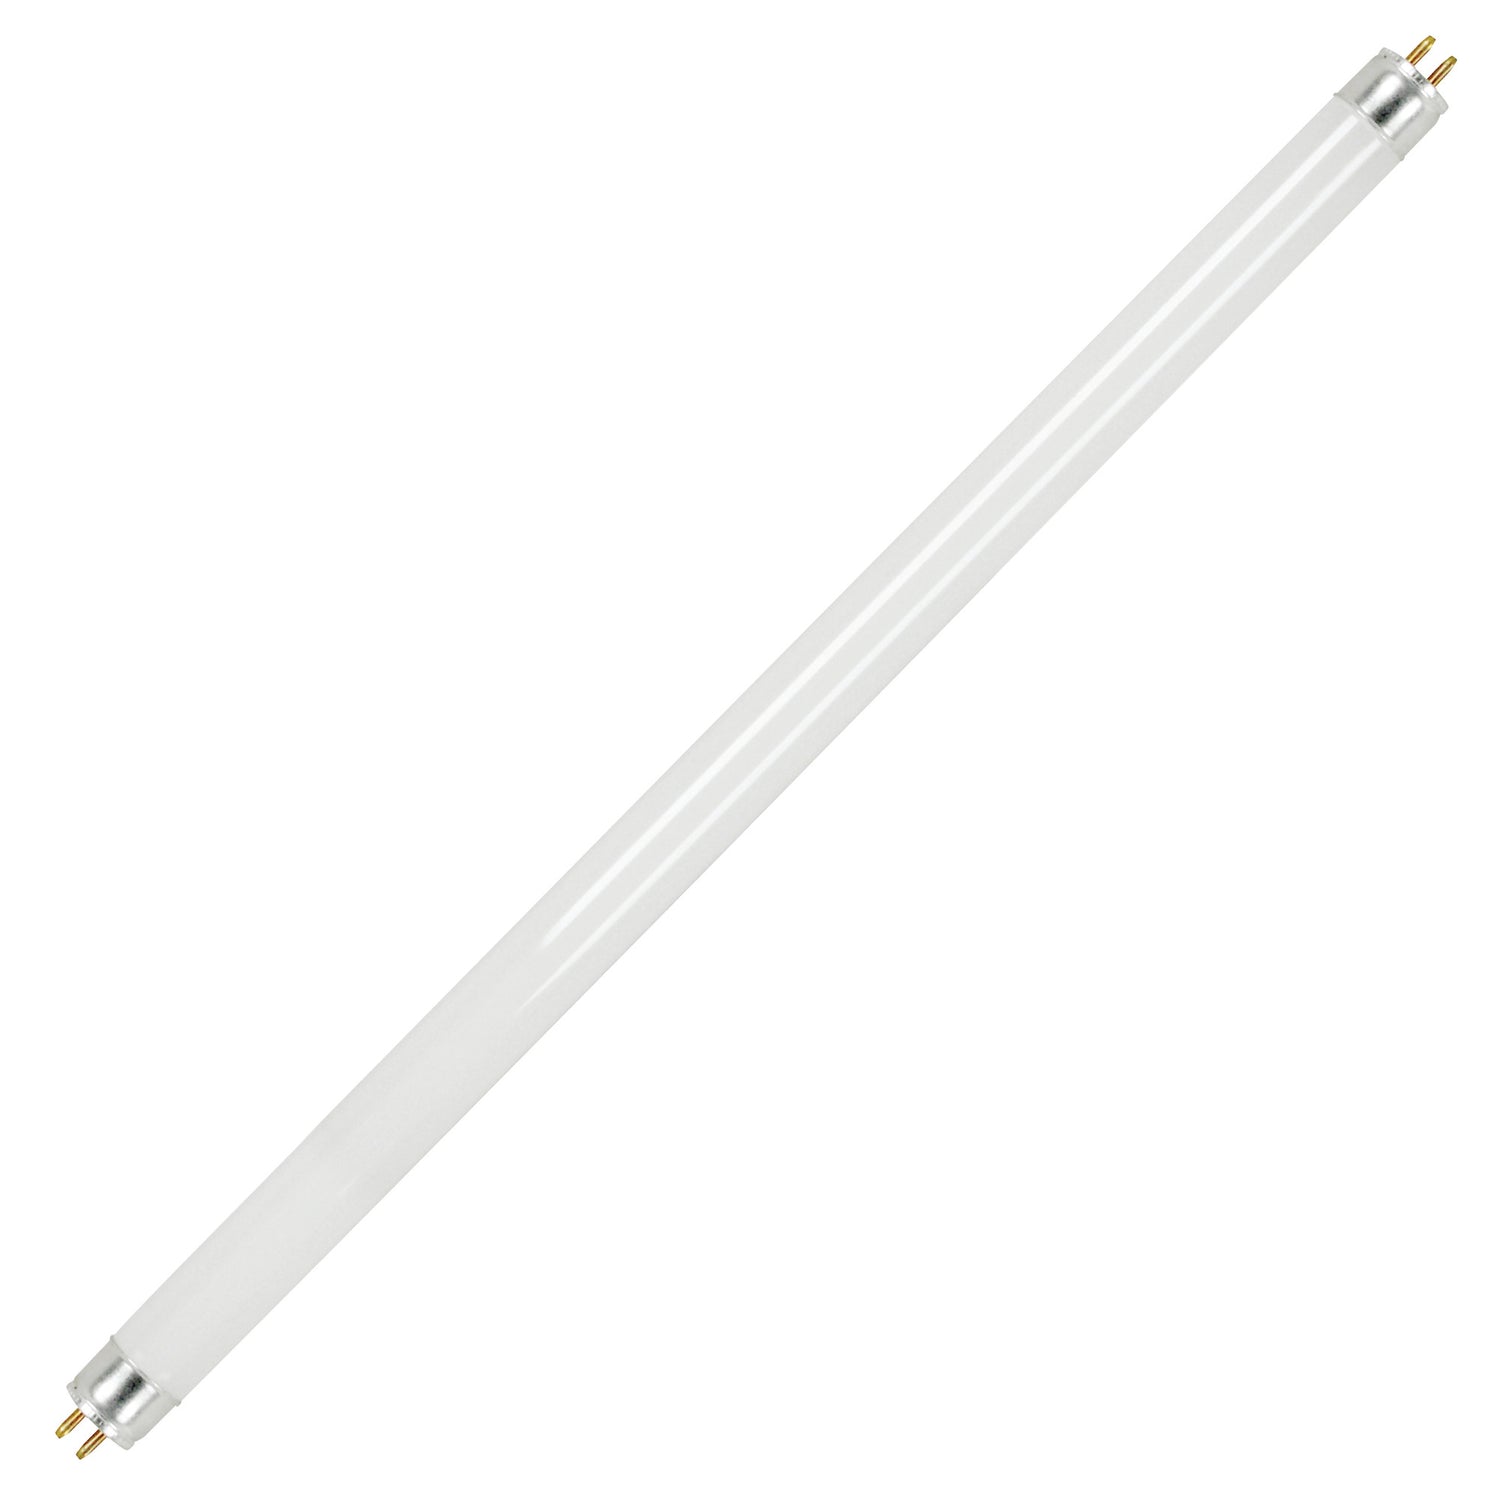 12 in. 8W Cool White (4100K) G5 Base (T5 Replacement) Fluorescent Linear Light Tube